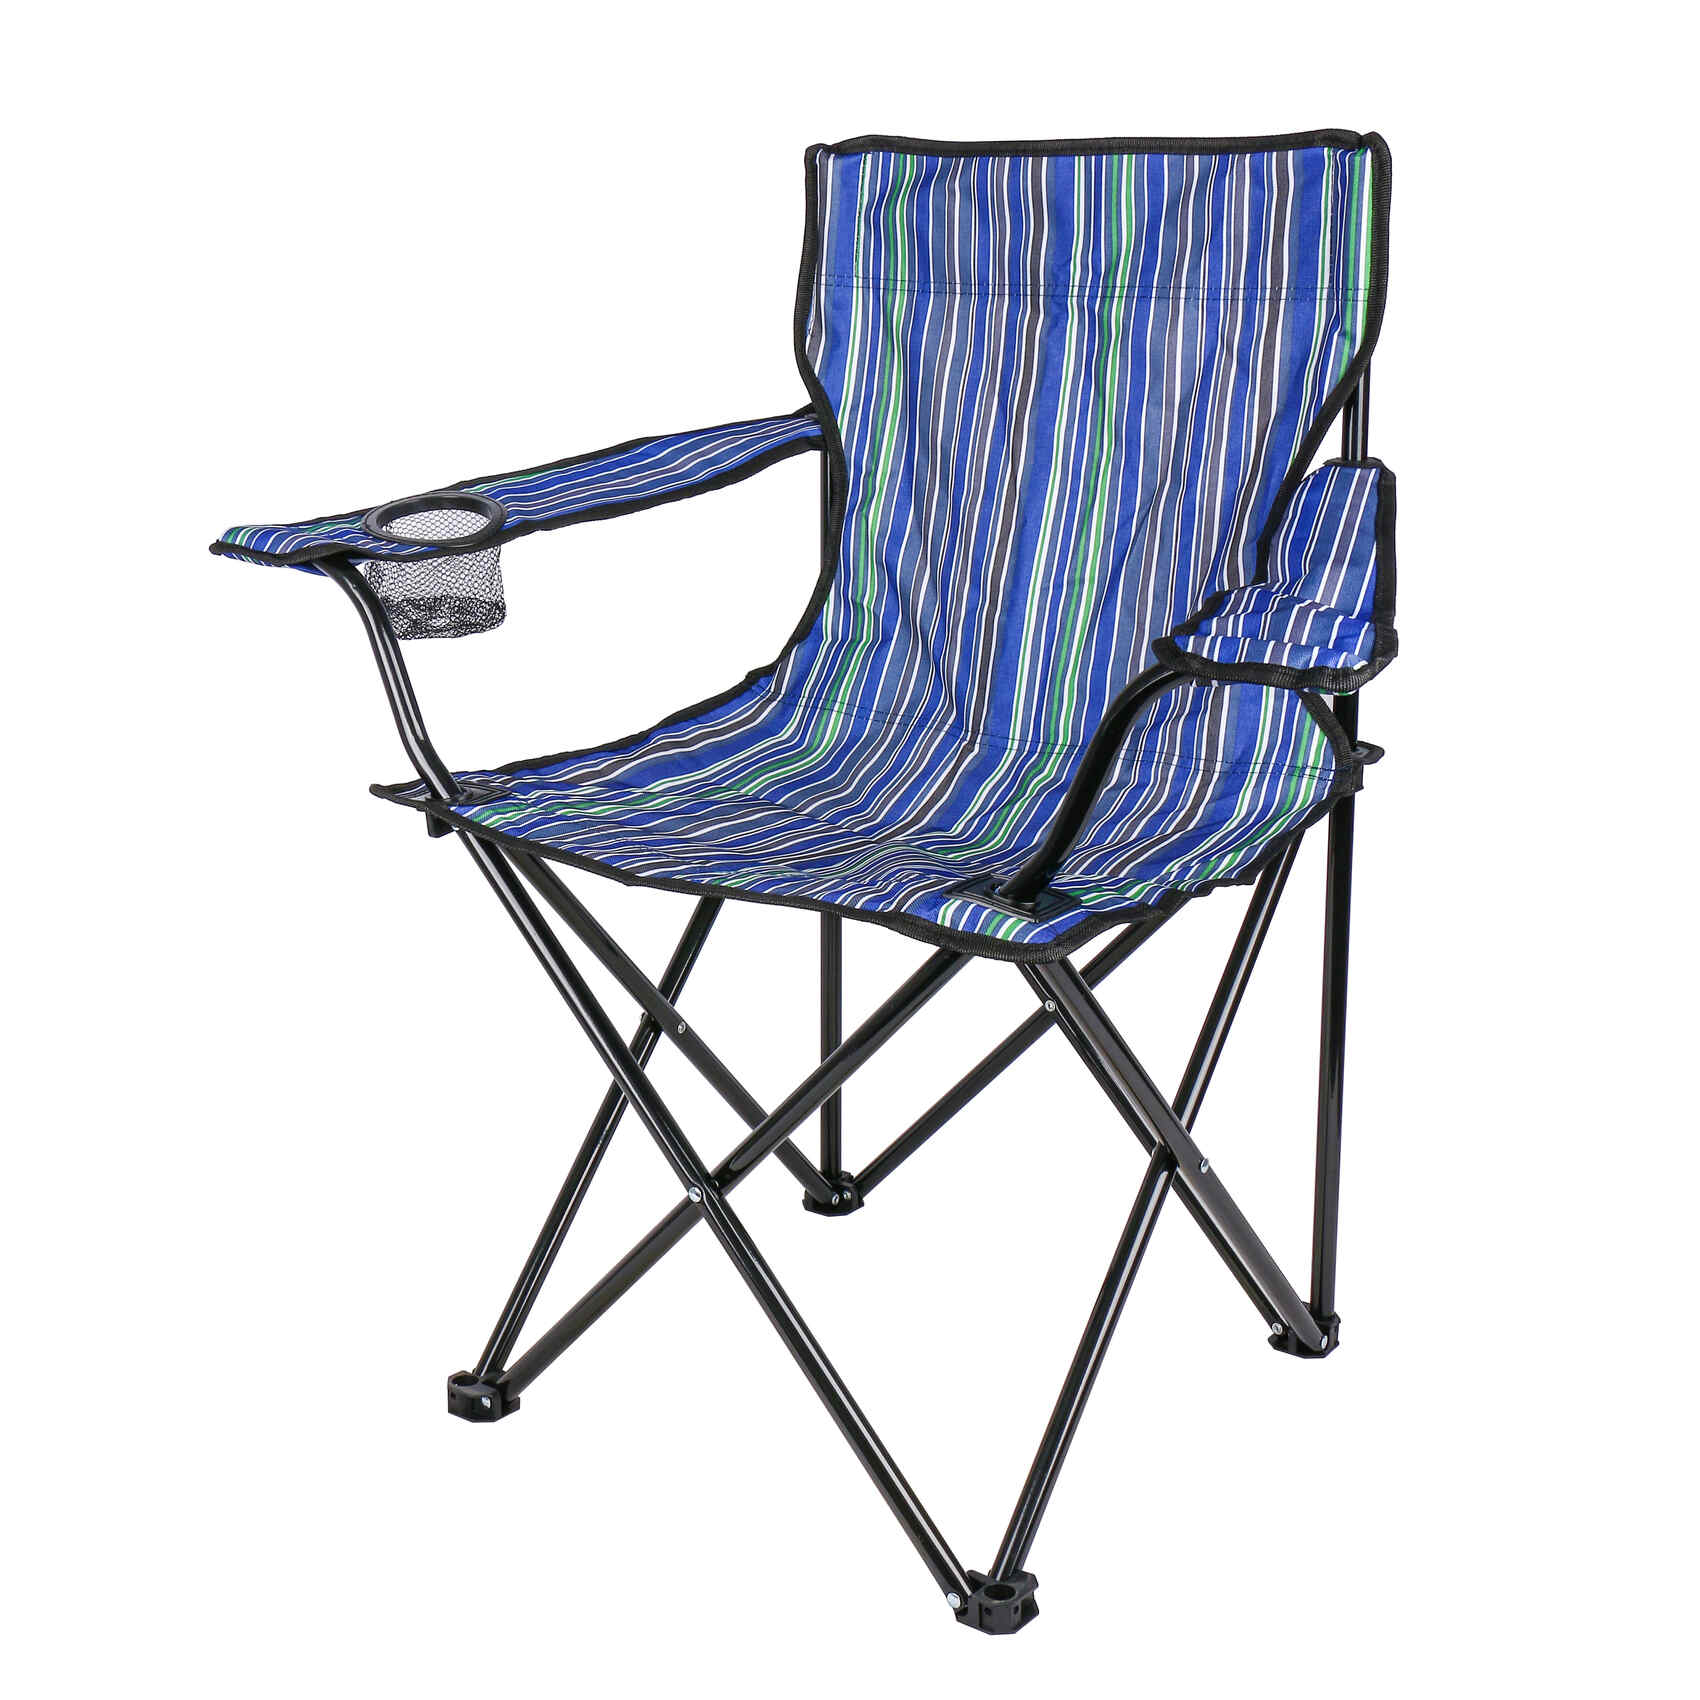 CAMPMATE FOLDABLE CAMPING CHAIR CM-7875 WITH CUP HOLDER | ASSORTED COLORS PATTERN | FOR CAMPING - FISHING -OUTDOOR- PICNIC